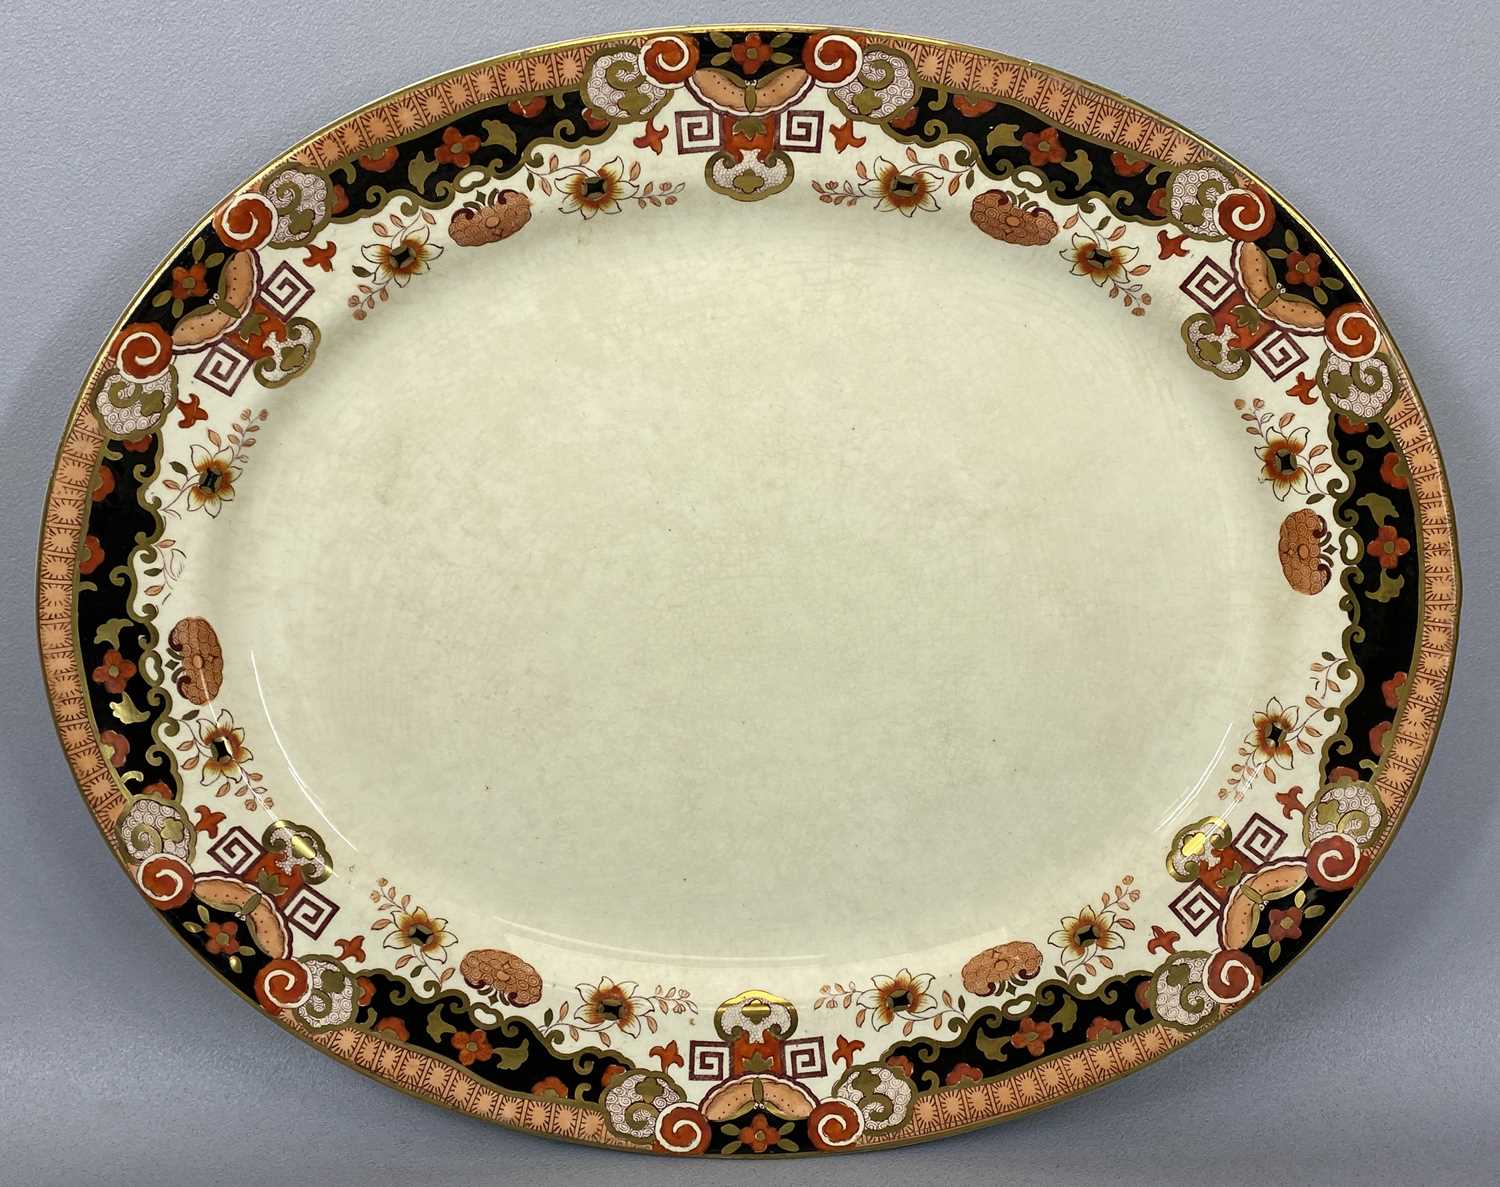 THREE STAFFORDSHIRE BLUE & WHITE TRANSFER DECORATED ASIATIC PHEASANT PATTERN OVAL PLATES, with 5 x - Image 3 of 6